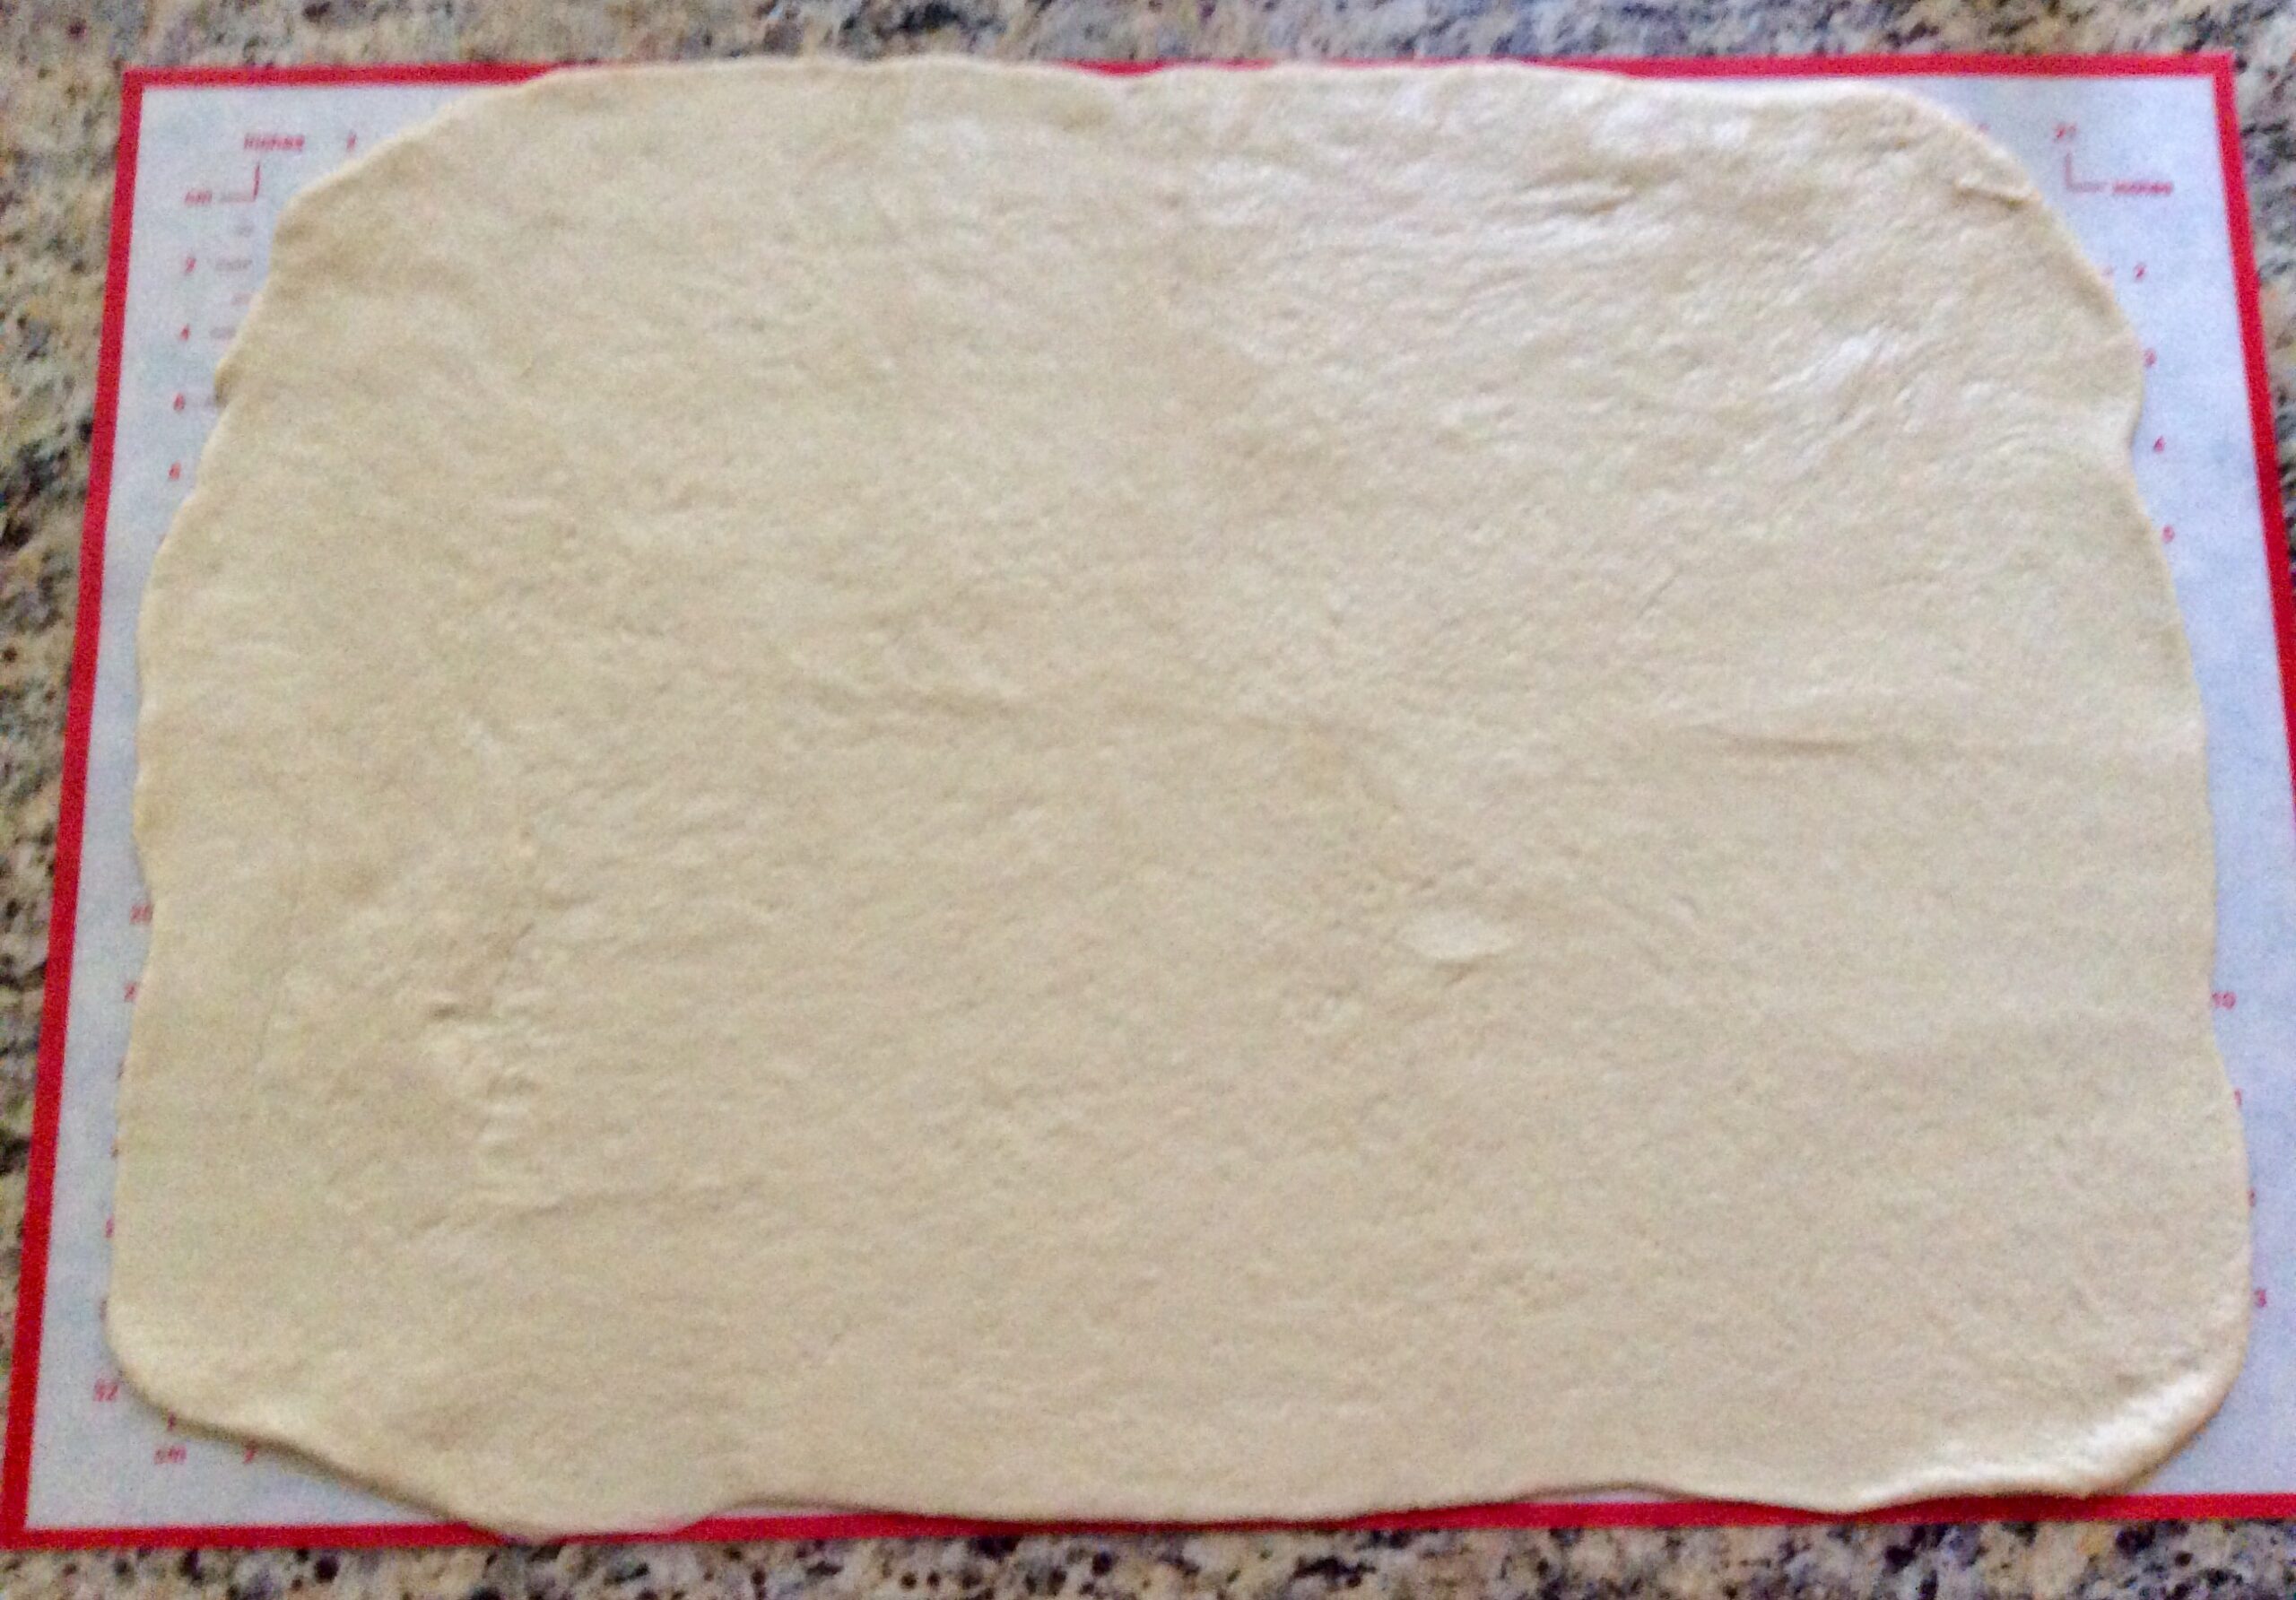 Roll out dough to a large rectangle